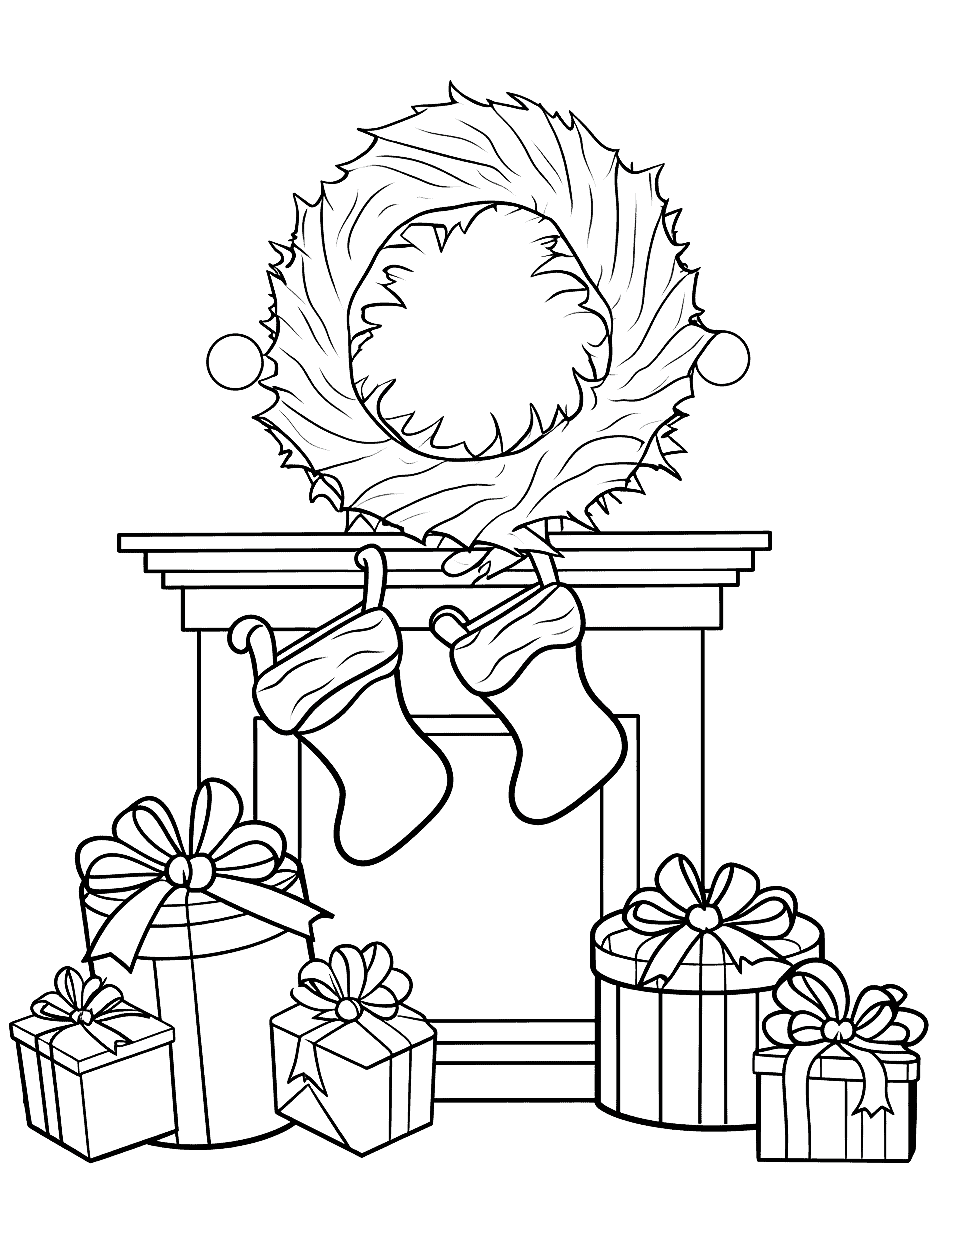 Christmas Fireplace Coloring Page - A warm fireplace with stockings hung and a plate of cookies for Santa.